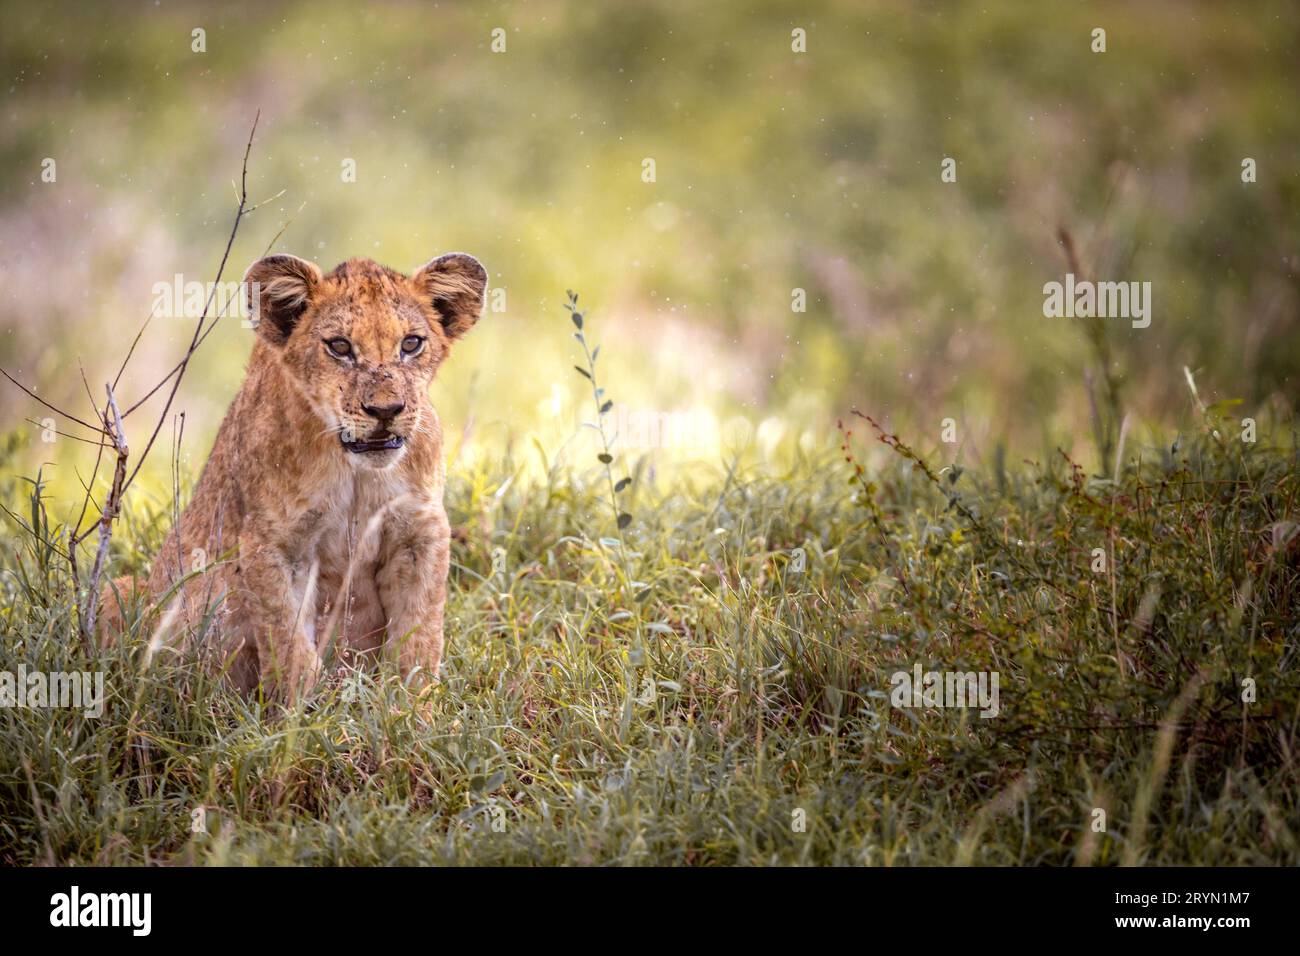 Lion cub on safari in the savannah of Africa playing in the grass Big cat Kenya Stock Photo